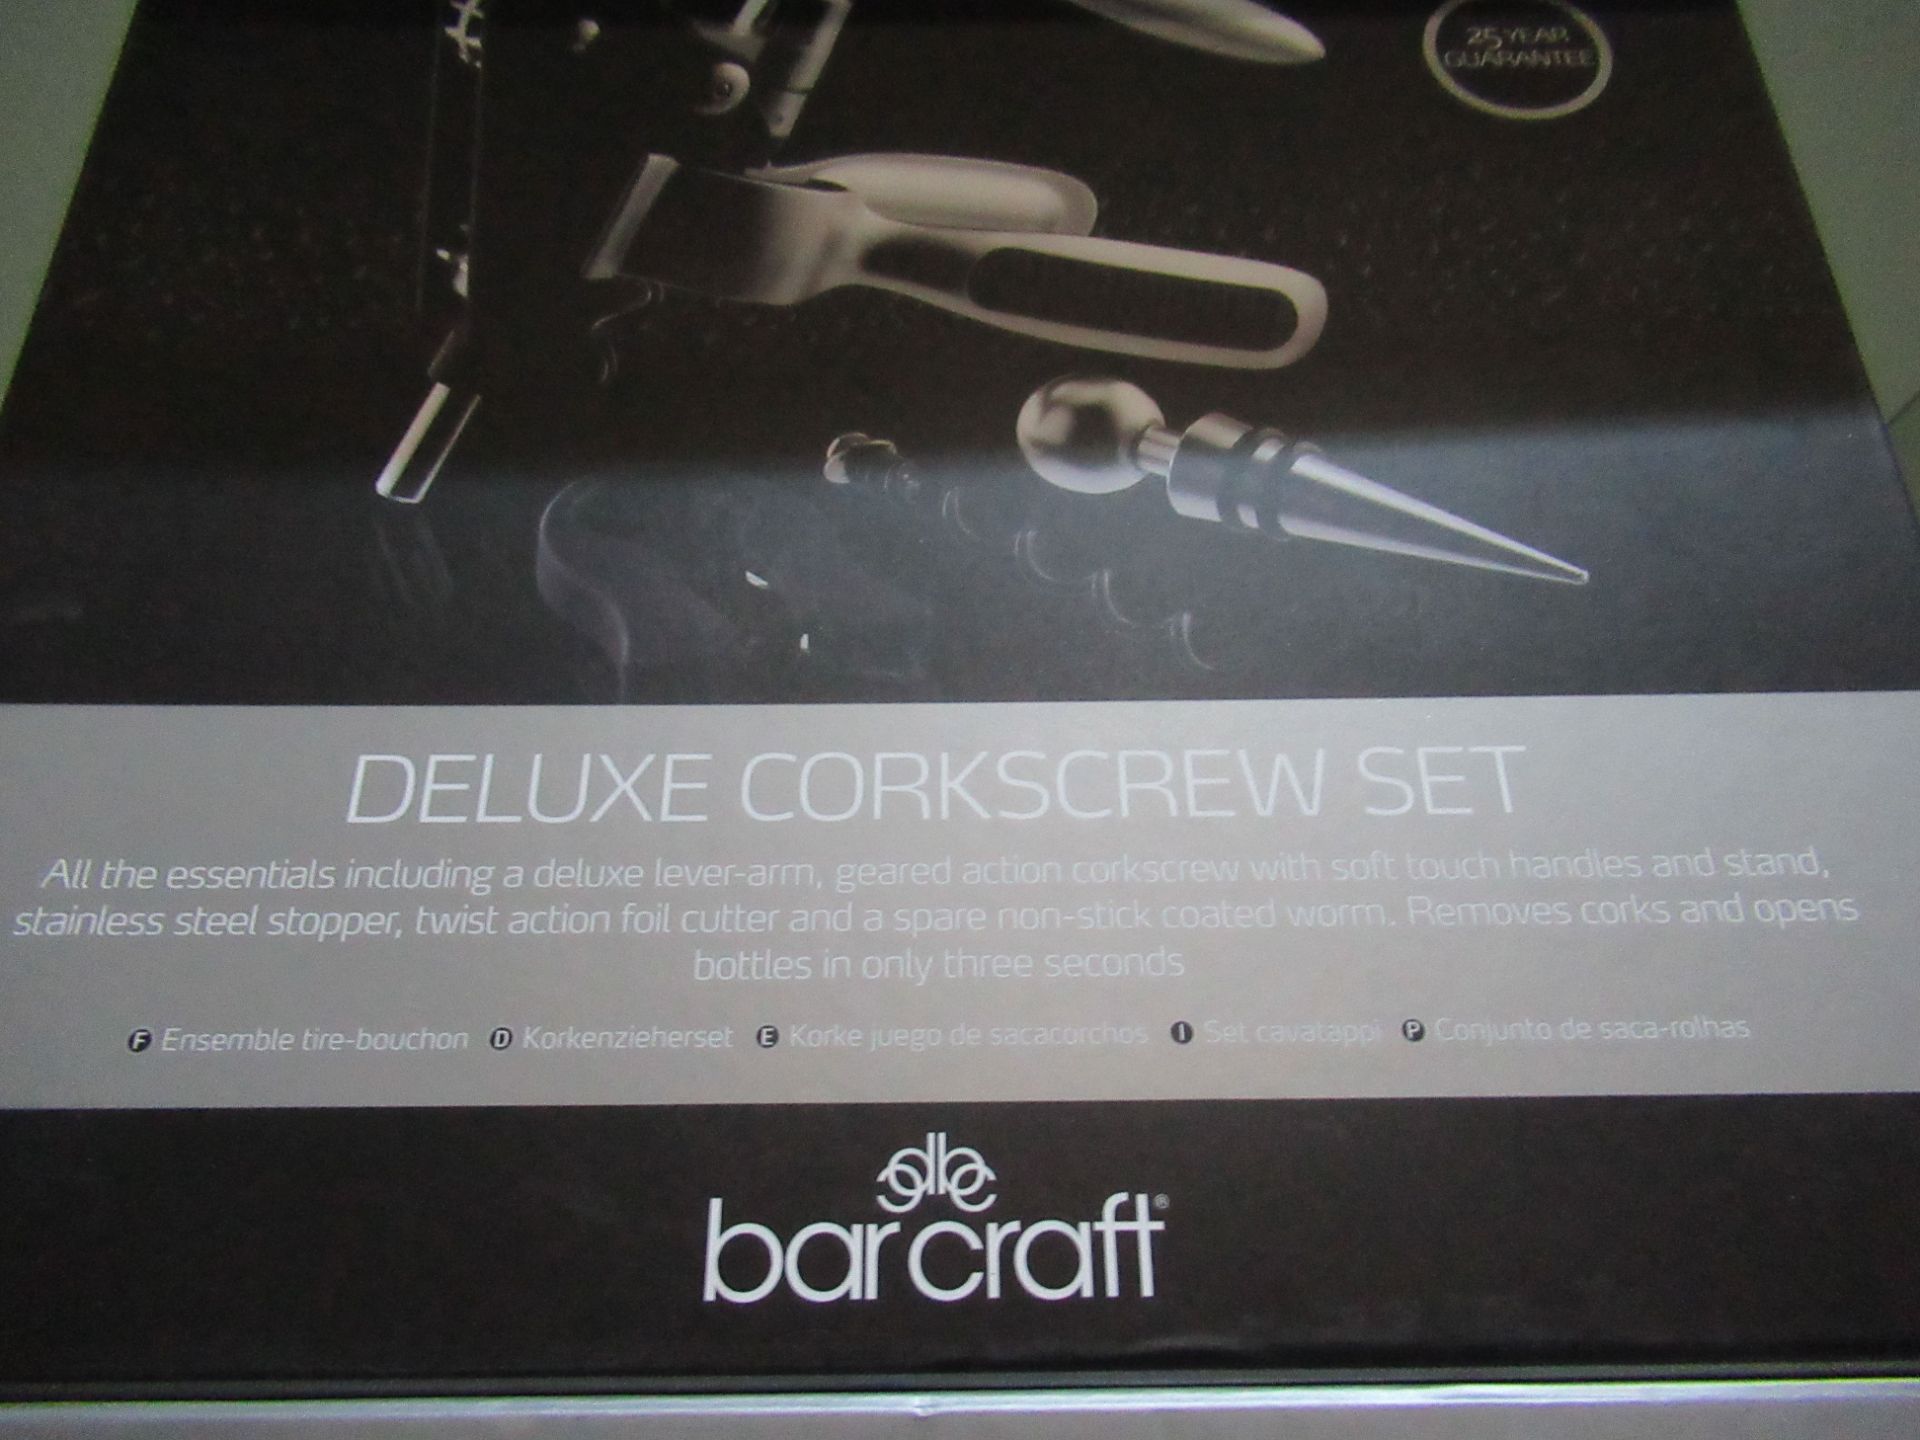 3x Bar Craft Deluxe Corkscrew Sets - Image 2 of 4